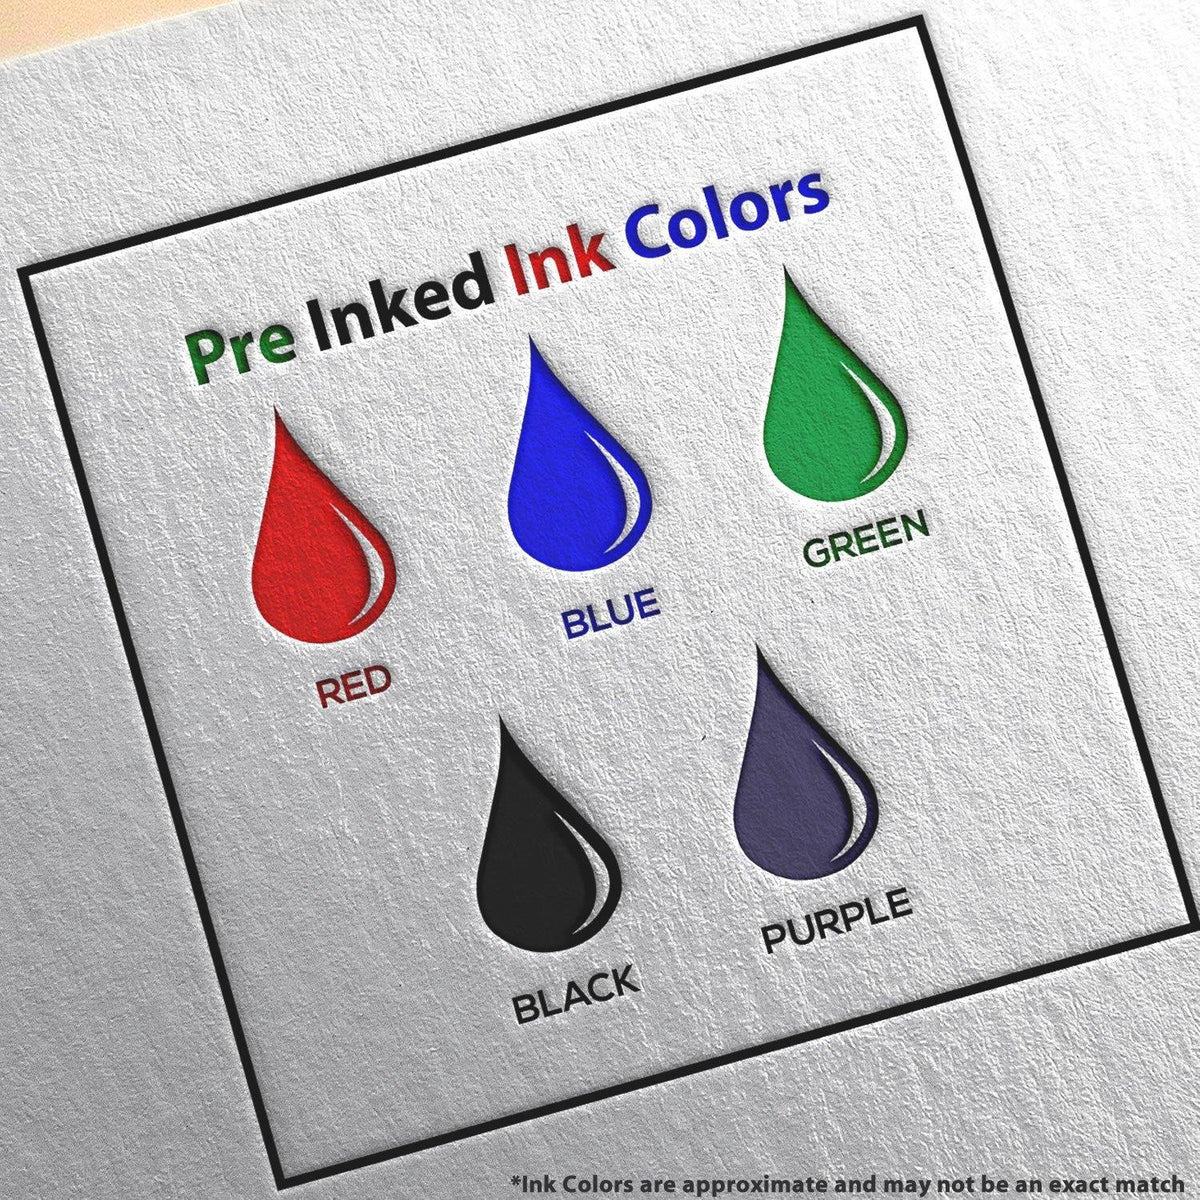 Large Pre Inked States Exhibit Stamp Ink Color Options